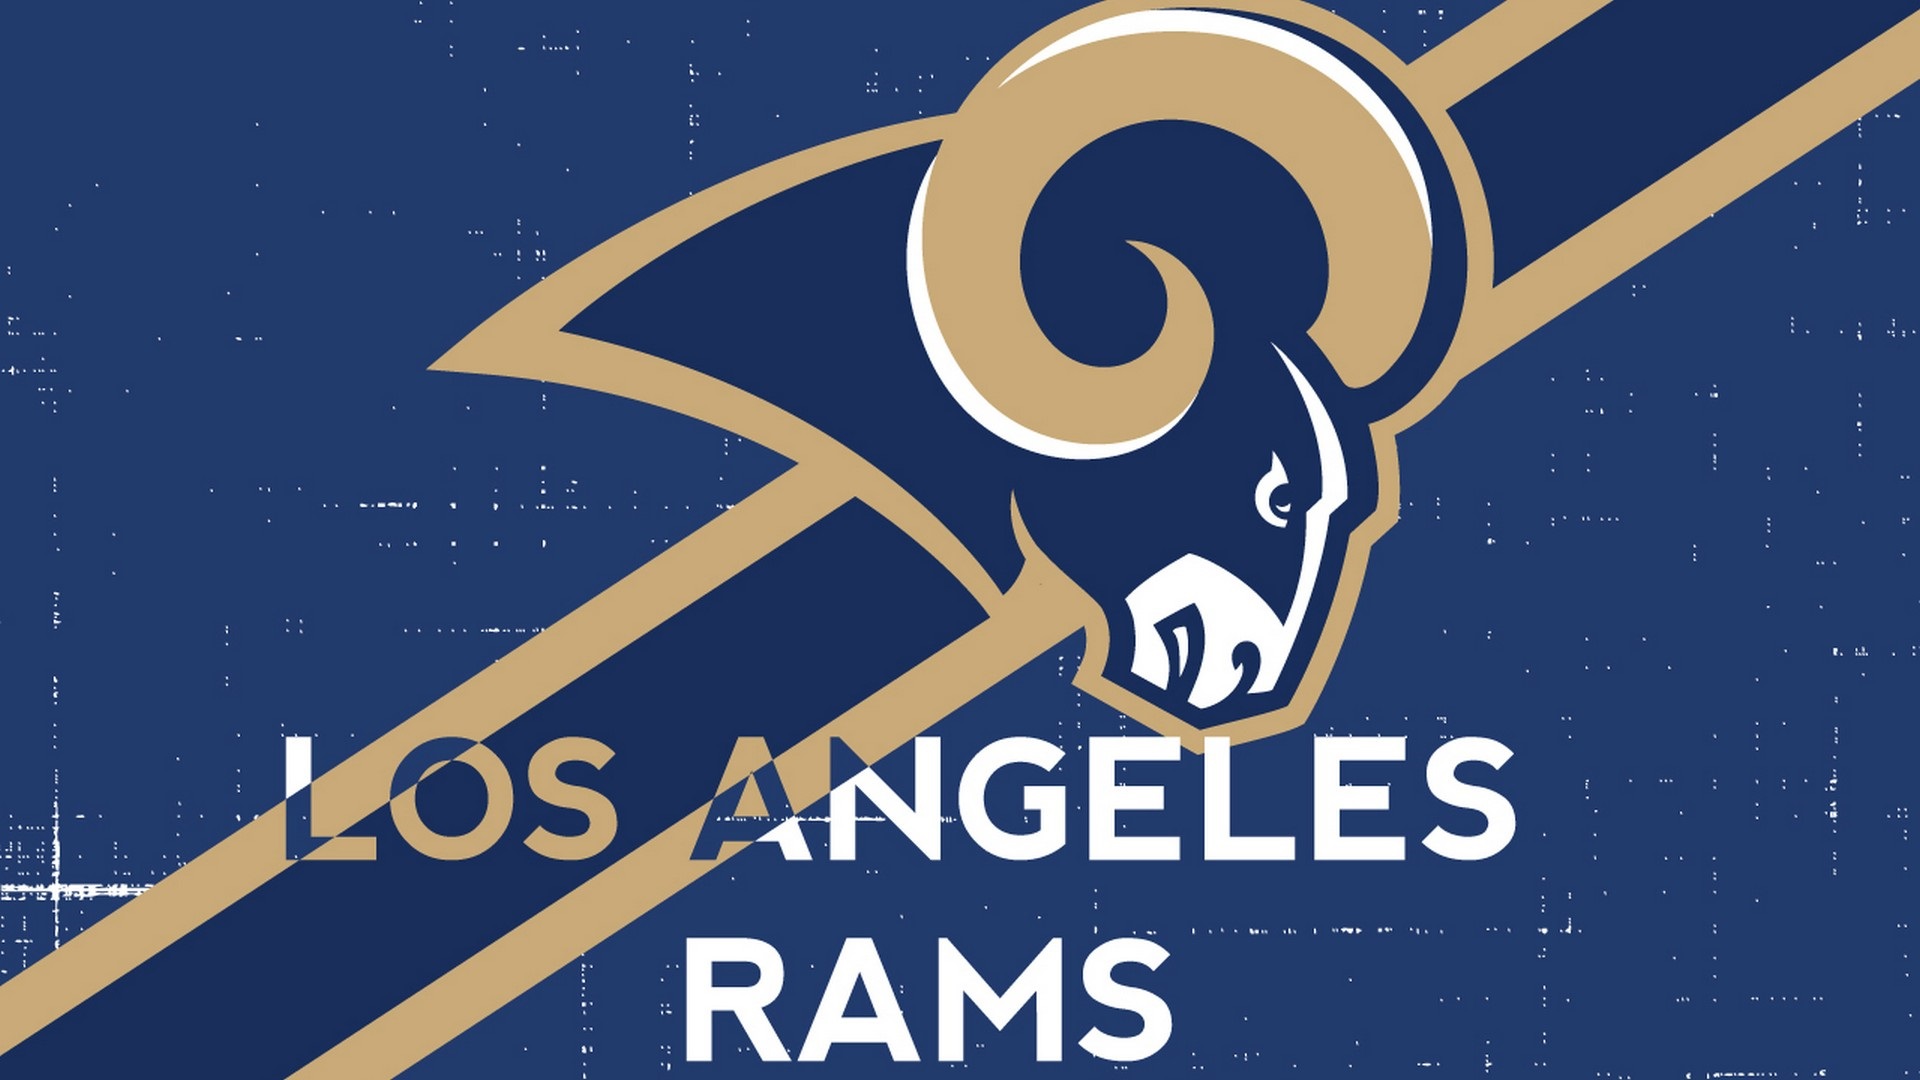 Los Angeles Rams Desktop Wallpapers With Resolution 1920X1080 pixel. You can make this wallpaper for your Mac or Windows Desktop Background, iPhone, Android or Tablet and another Smartphone device for free